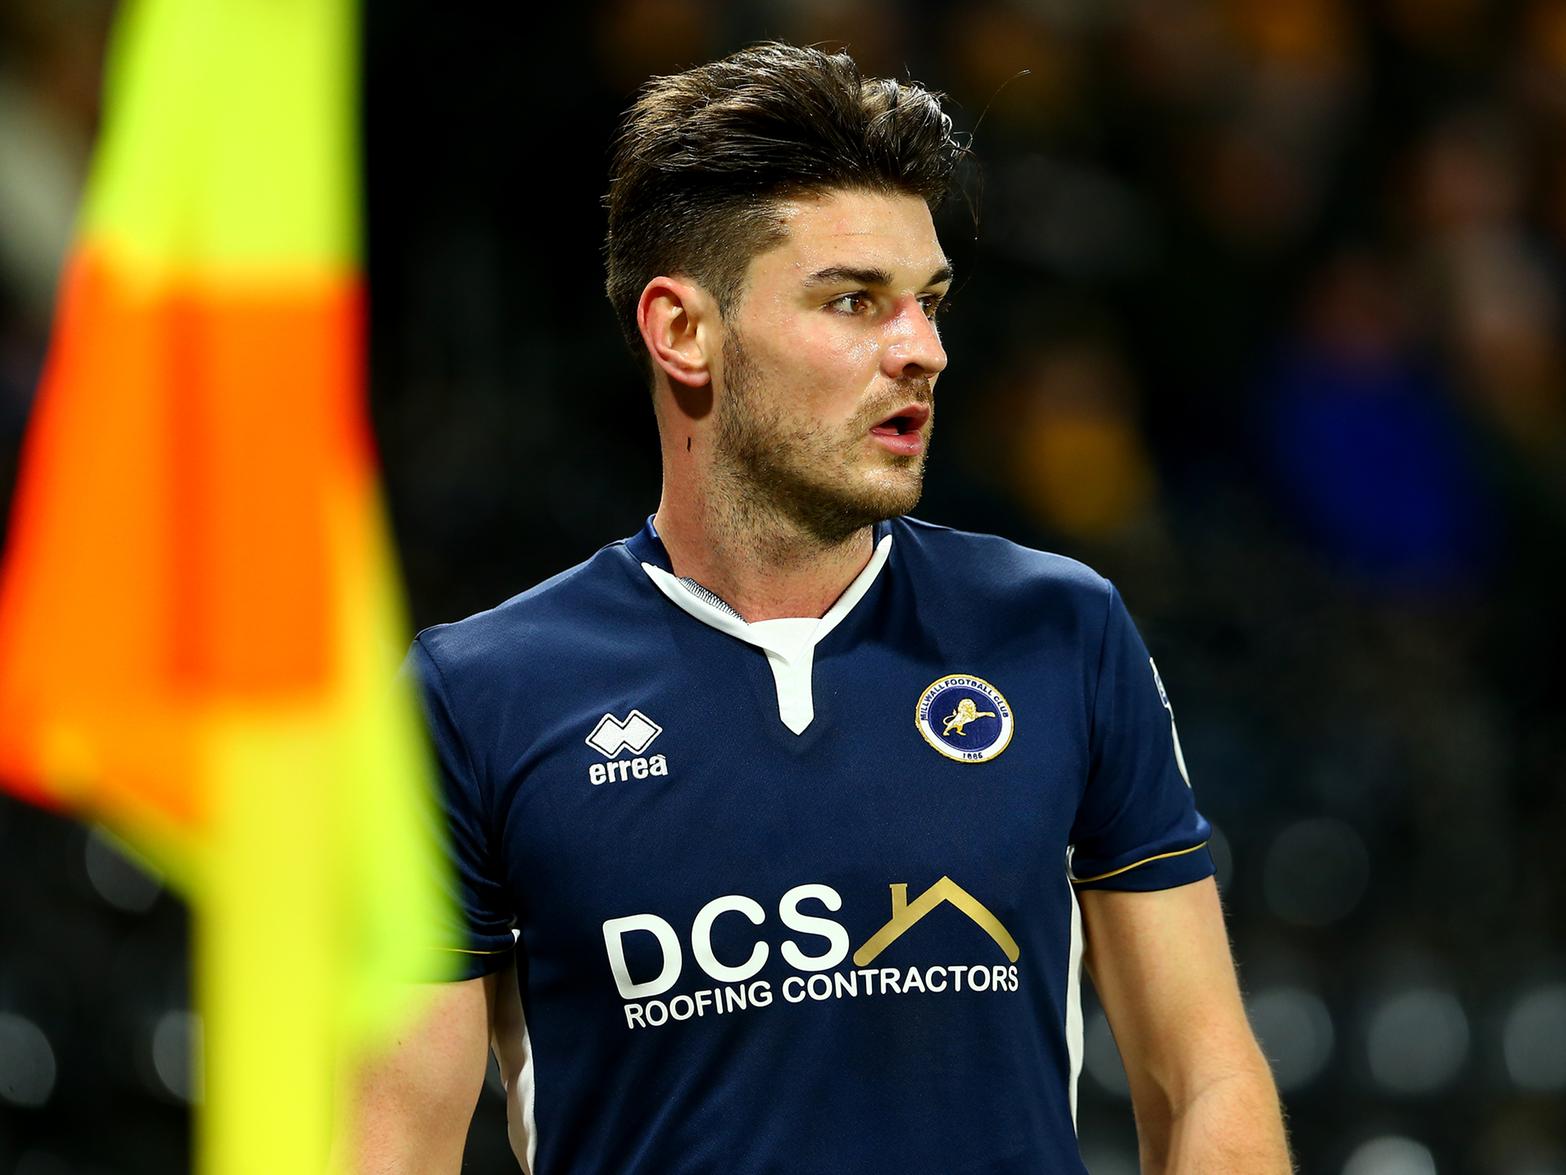 Ex-Sheffield Wednesday and Millwall winger Ben Marshall is said to be training with Bolton Wanderers, as he looks to find a new club after leaving Norwich City at the end of last season. (The 72)